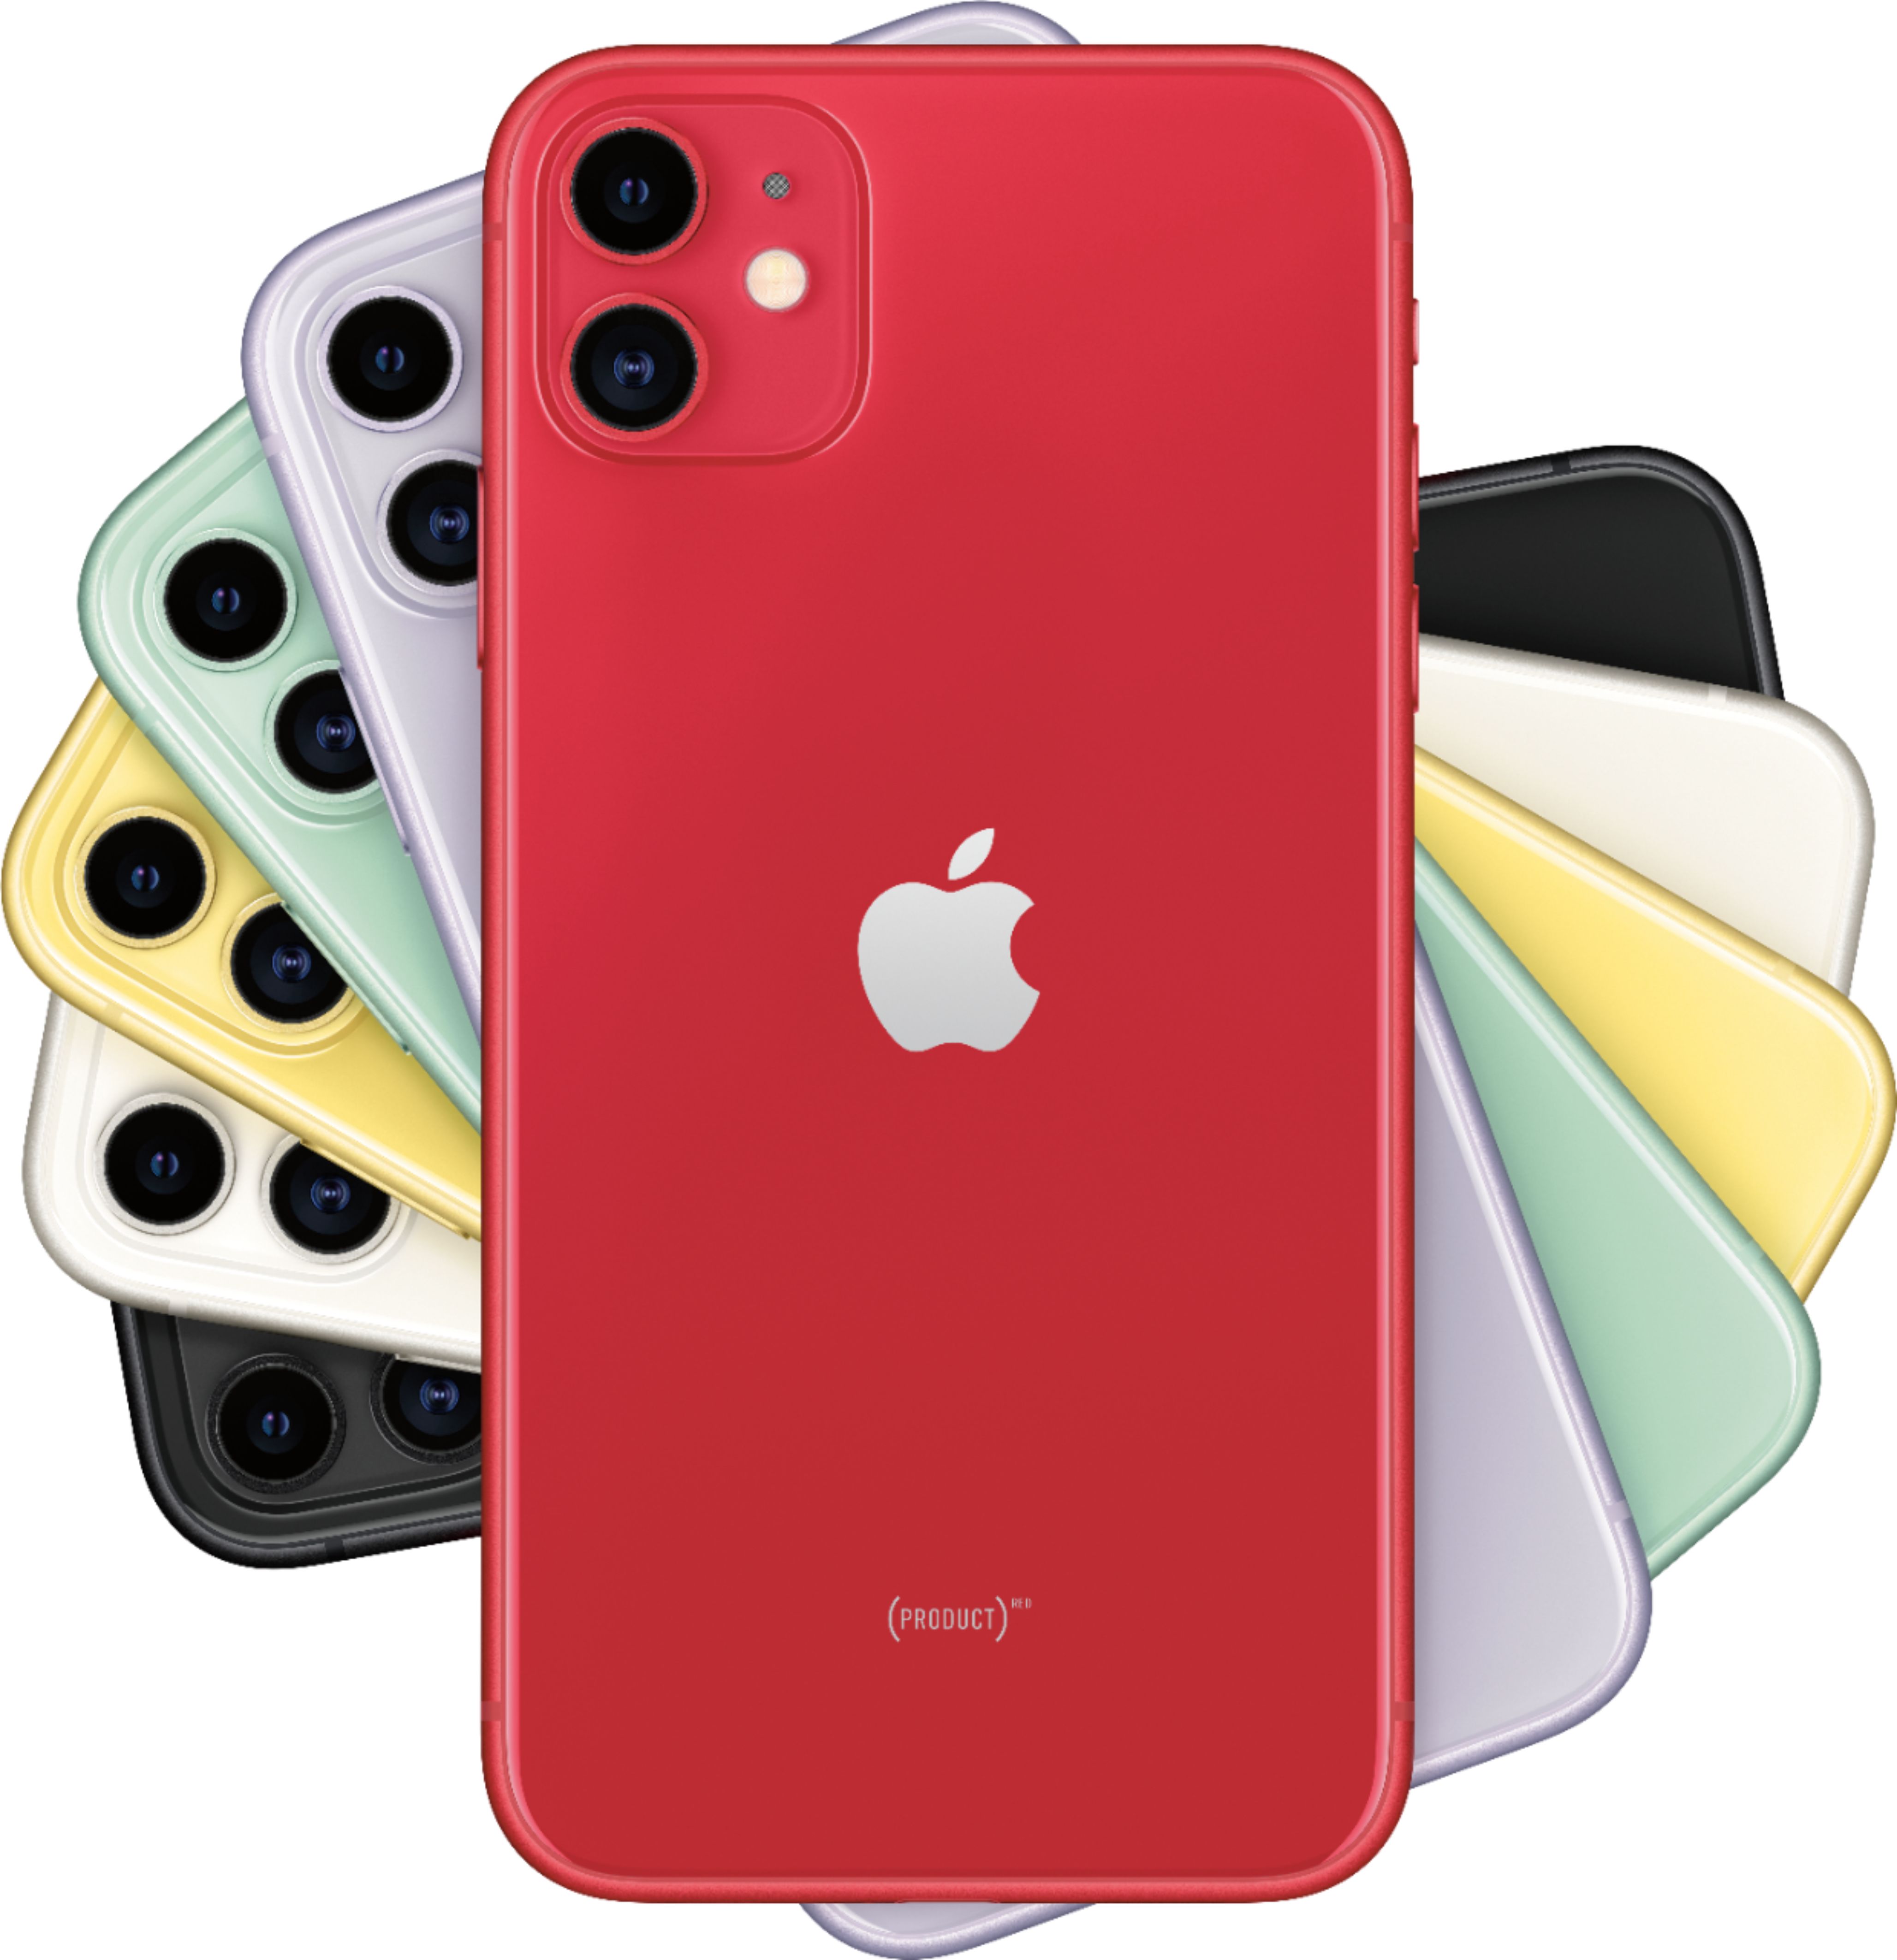 Apple iPhone 11 128GB (PRODUCT)RED (AT&T  - Best Buy